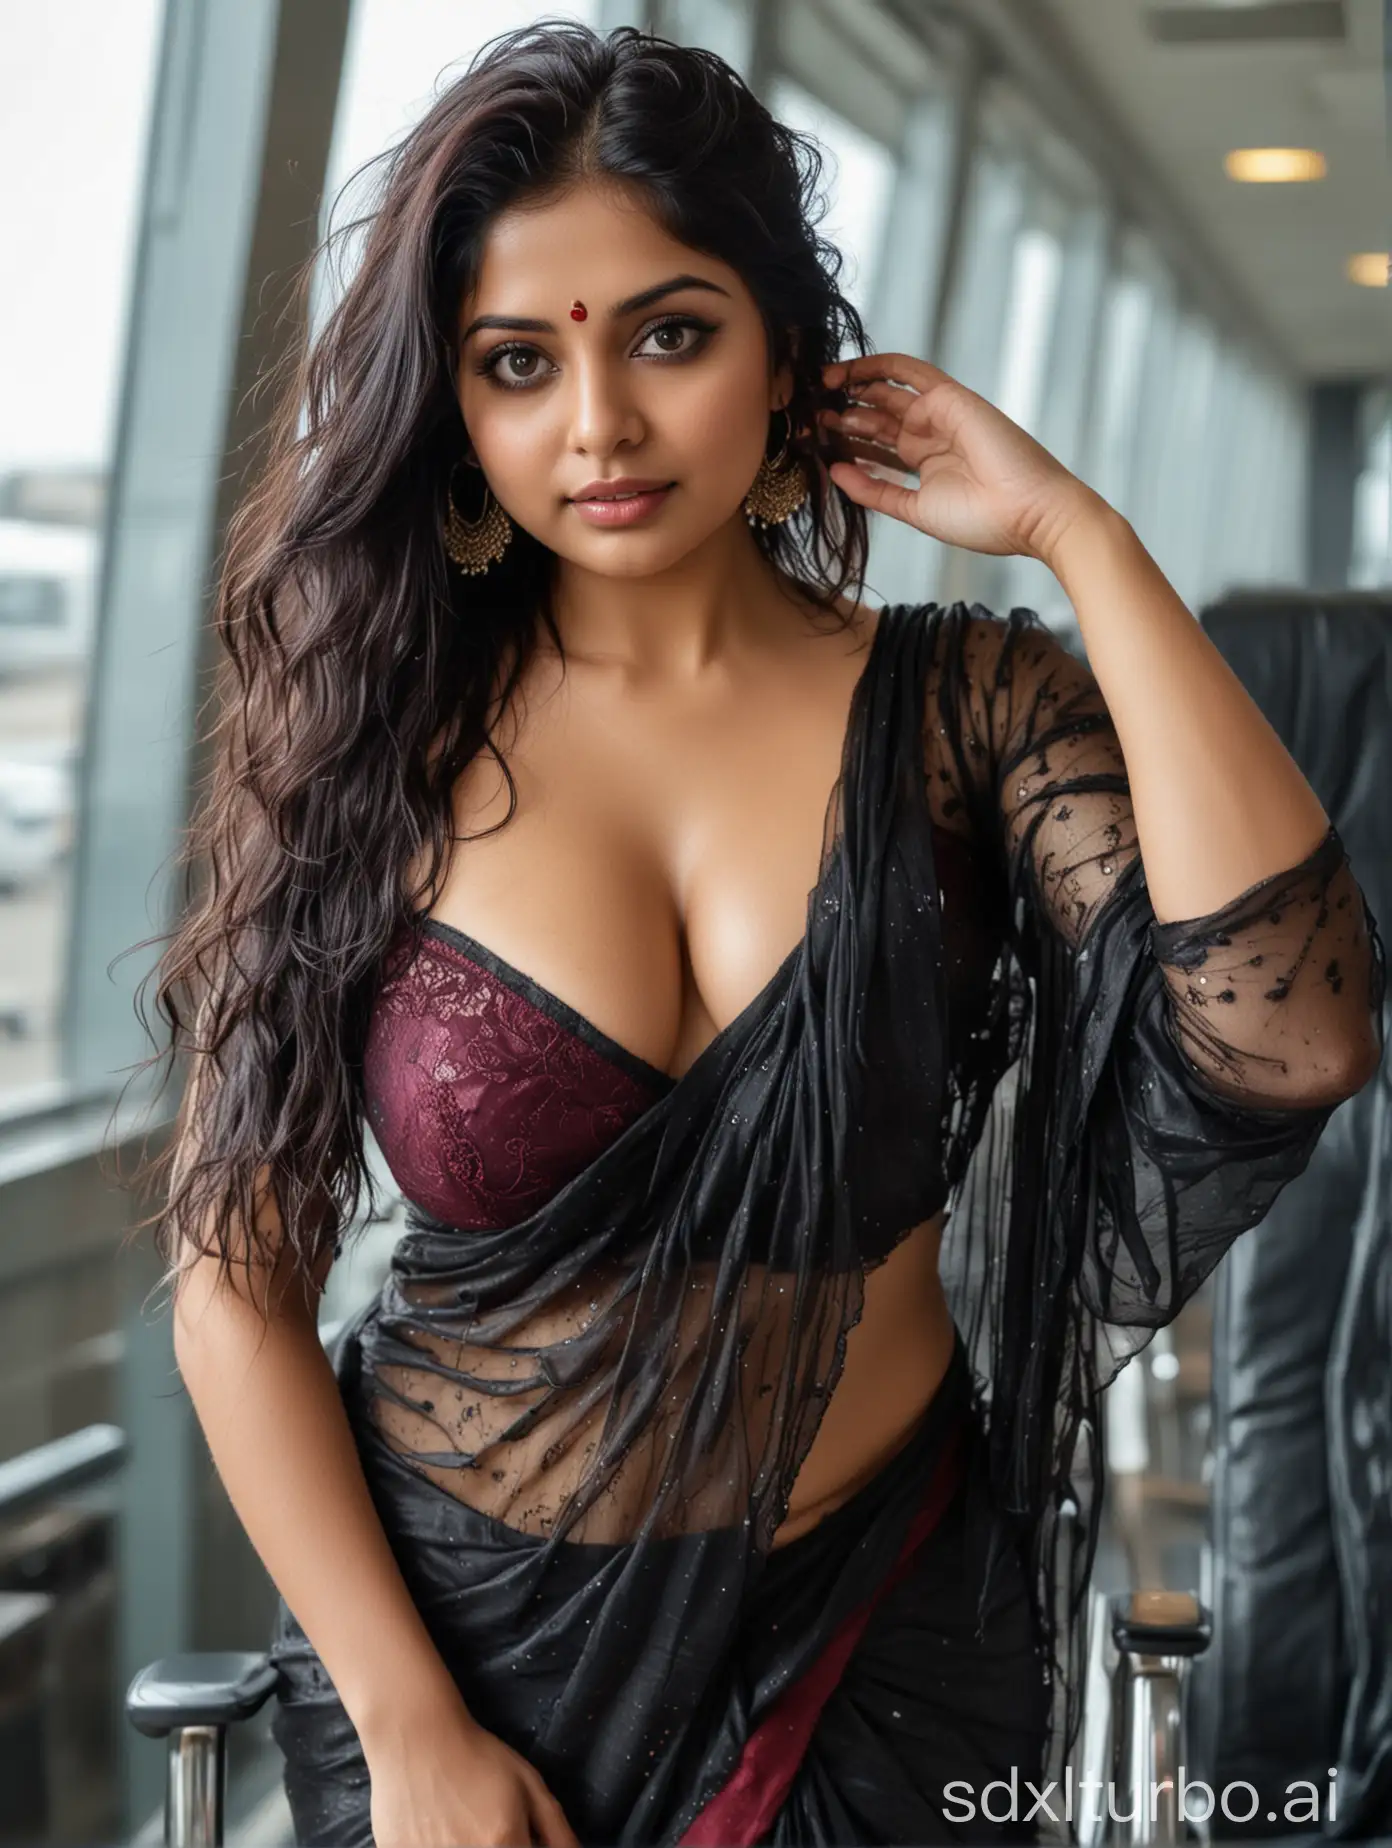 wet messed up hair, flowy hair, wearing Womens See Through black saree with deep v cleavages, curvy indian woman, she has a enormous breasts, busty body, big eyes, perfect wine eyes, fantastic face, beautiful look, with Plump female body, she has a busty body, She is showing deepest v cleavage. Her hair is styled in loose waves. blurred background, full body view until calf. She is standing on the chair at airport. side view.